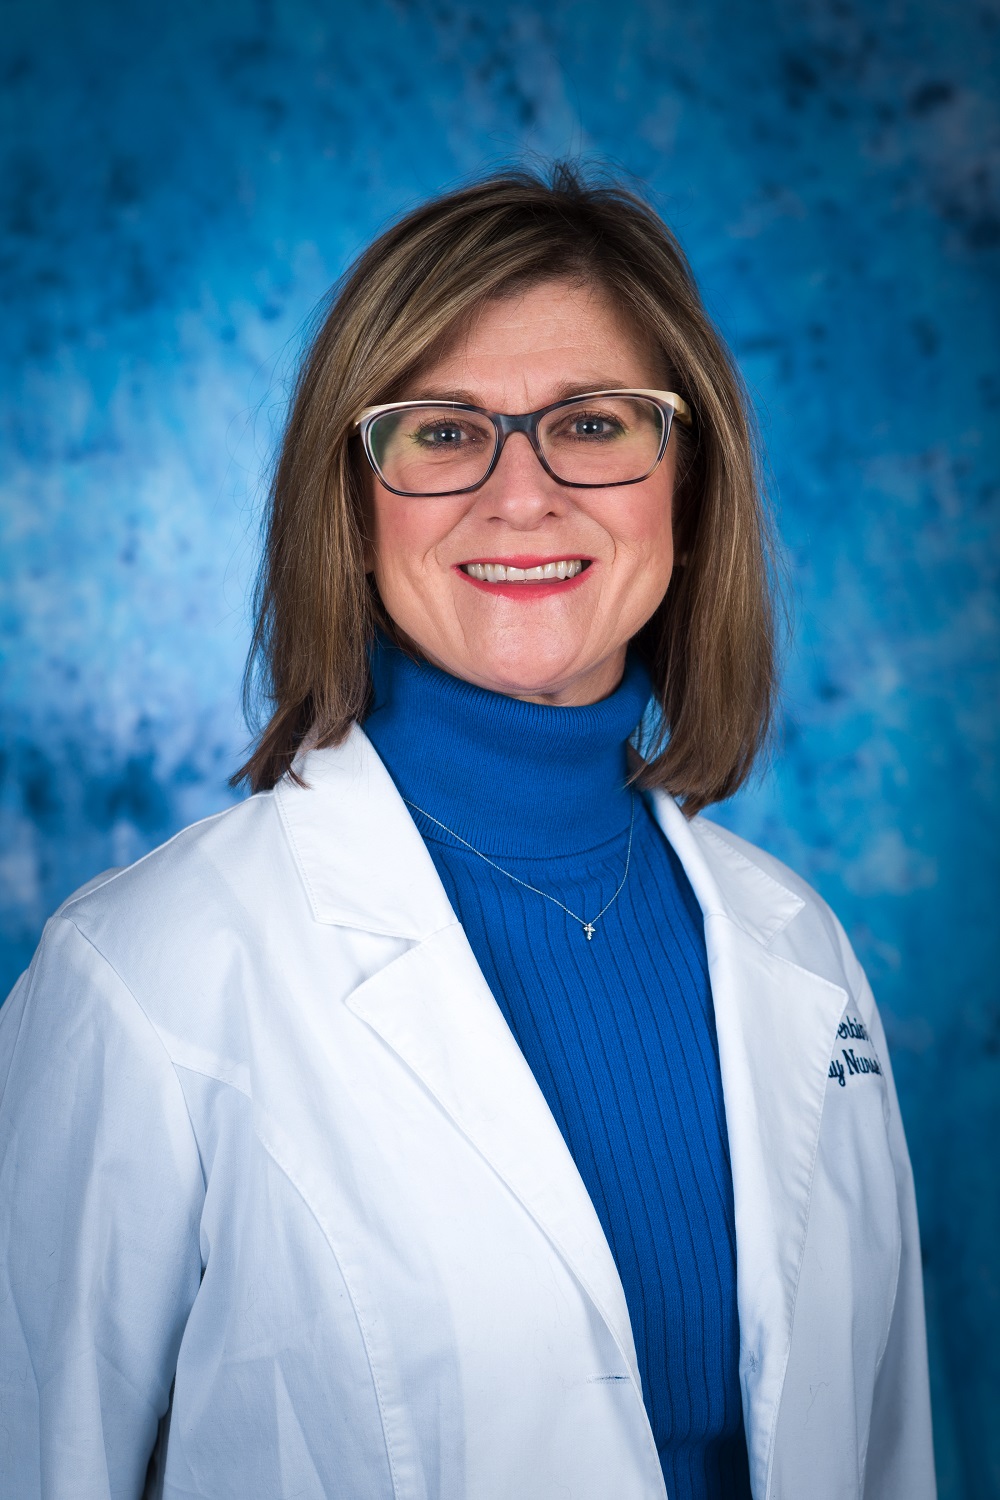 Mary F. Serbin, MSN, FNP-BC of Morristown Family Medicine